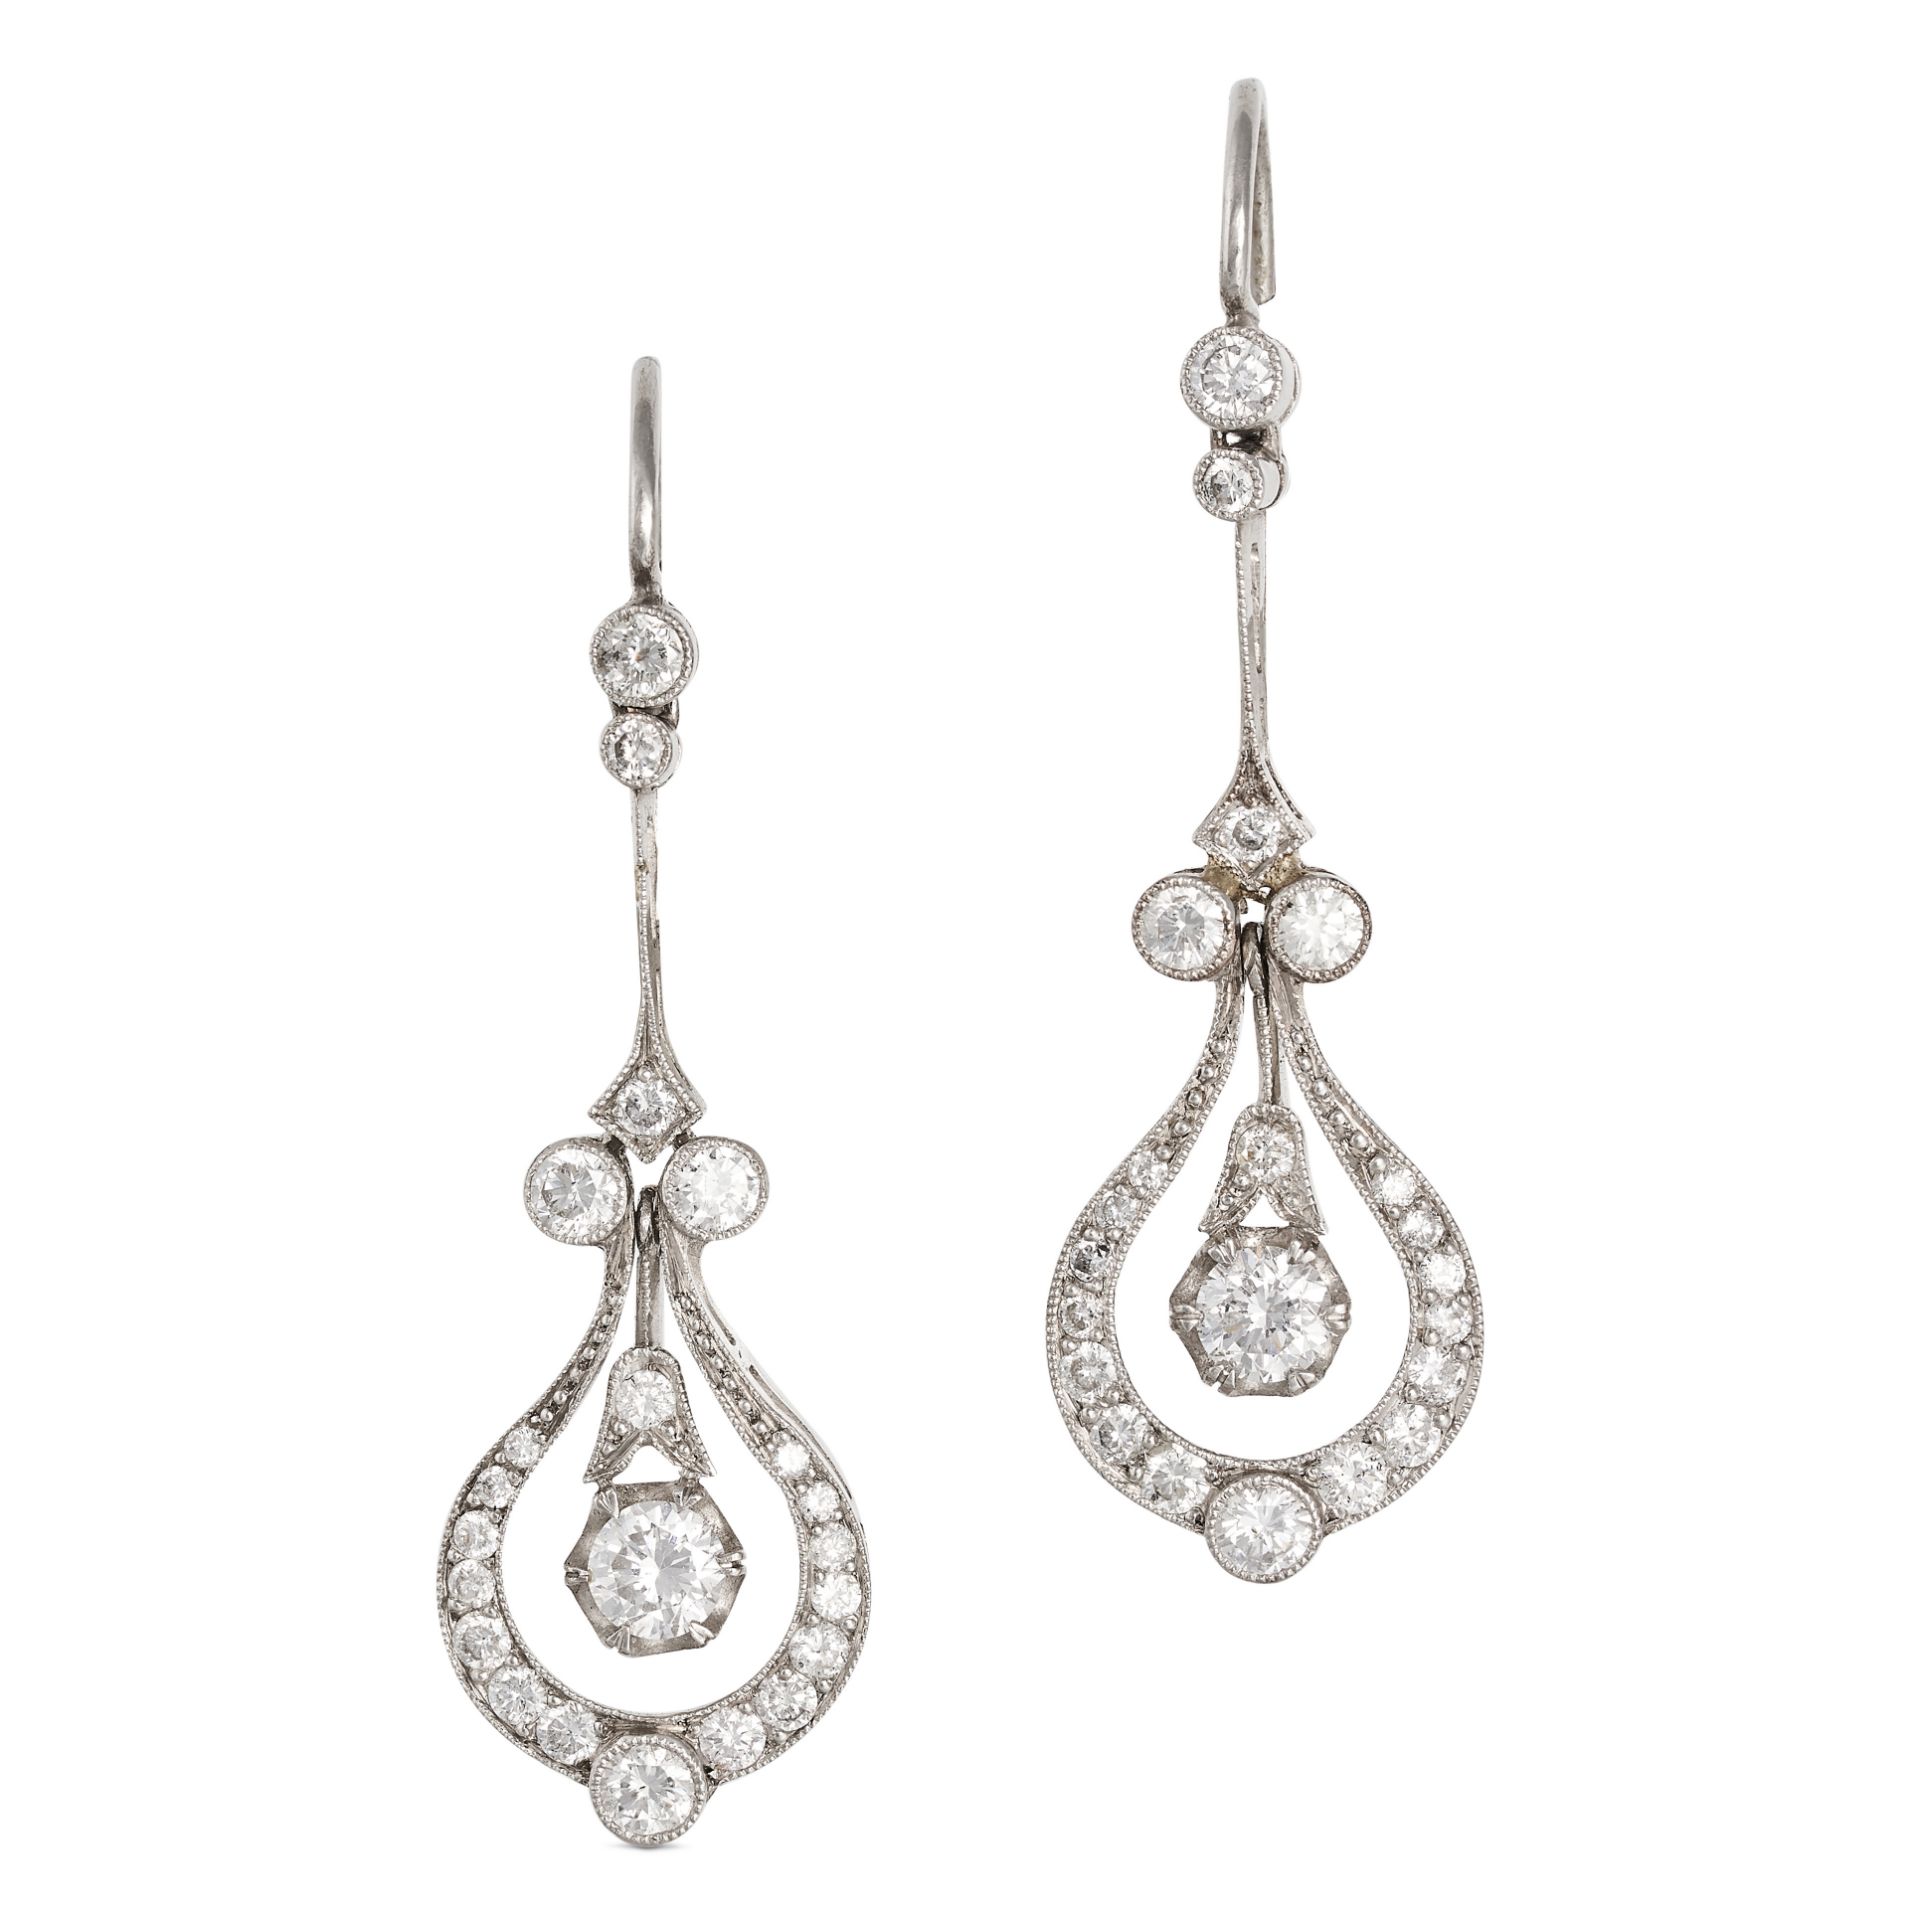 A PAIR OF VINTAGE DIAMOND DROP EARRINGS in an openwork design, suspending a round brilliant cut d...